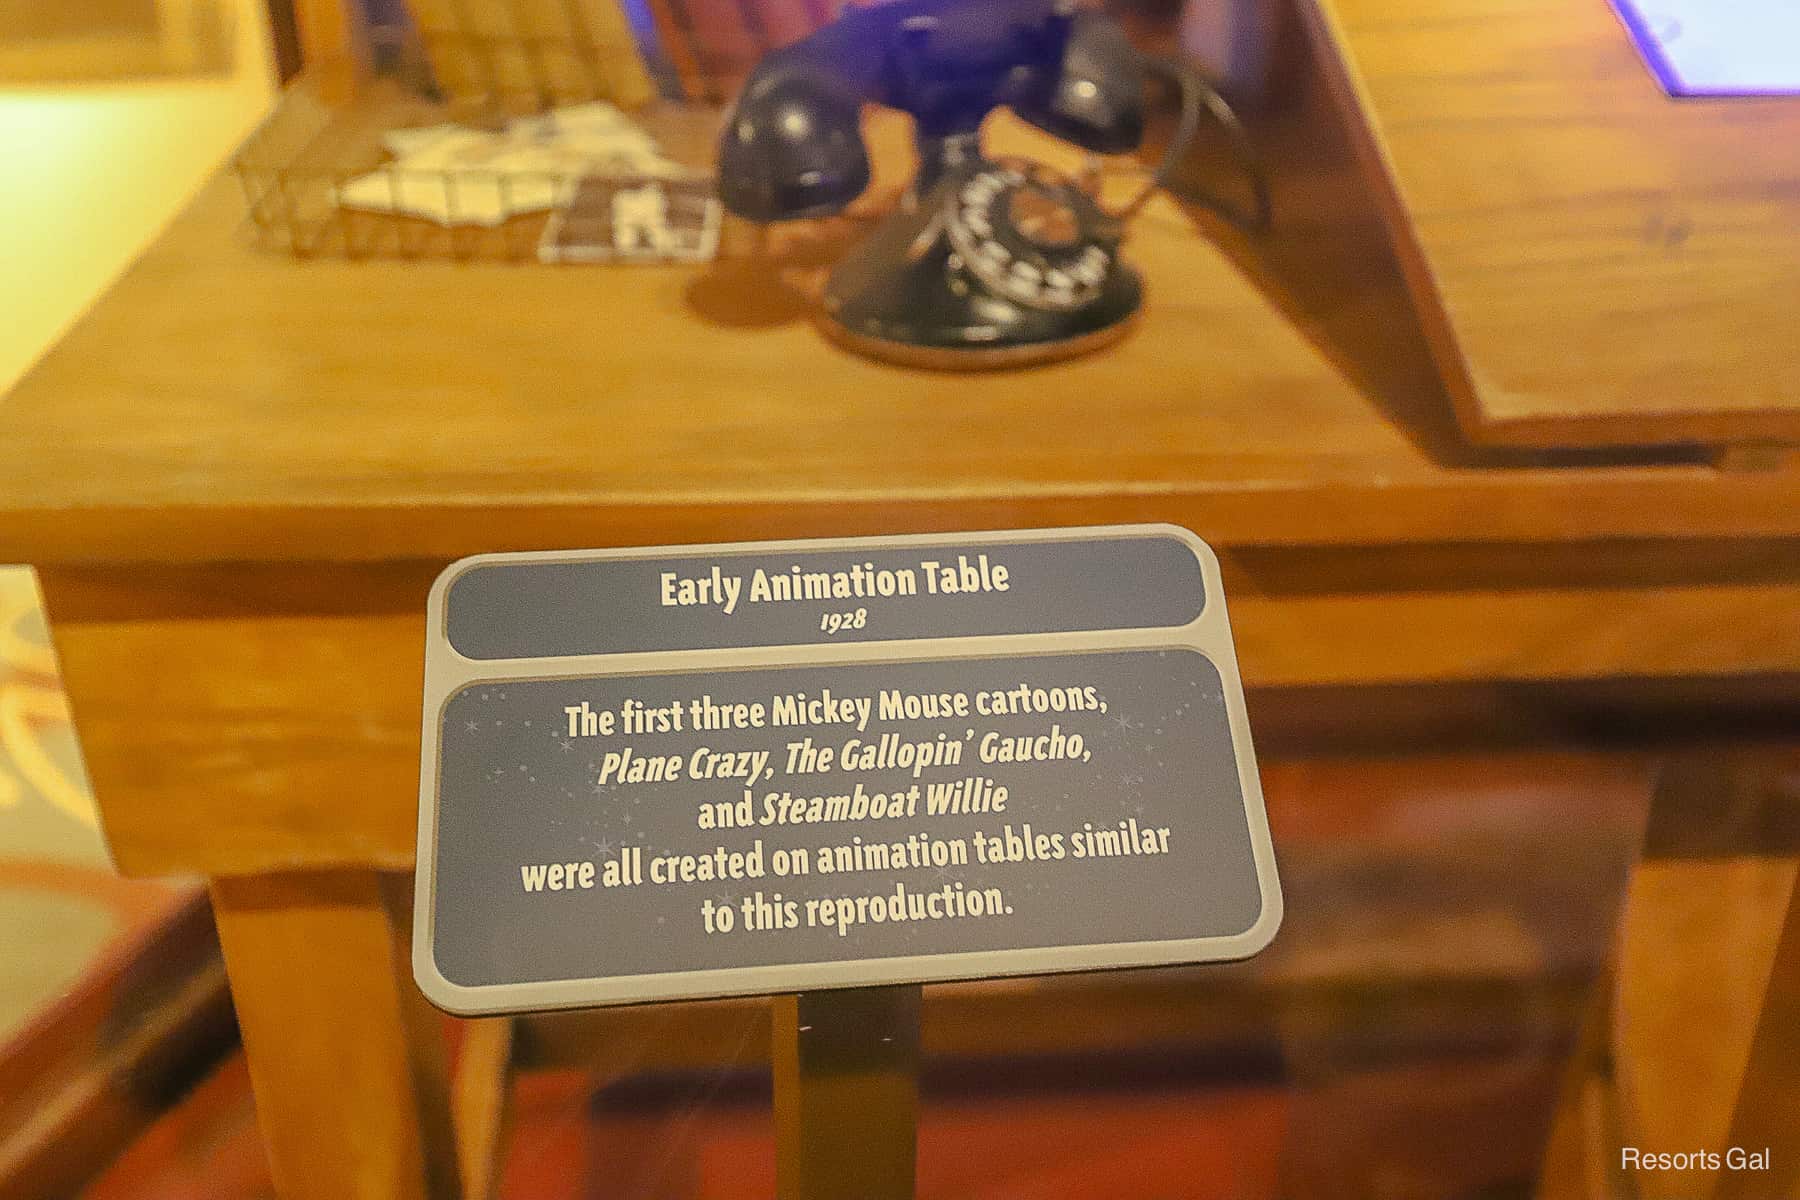 a sign that reads "Early Animation Table" 1928 